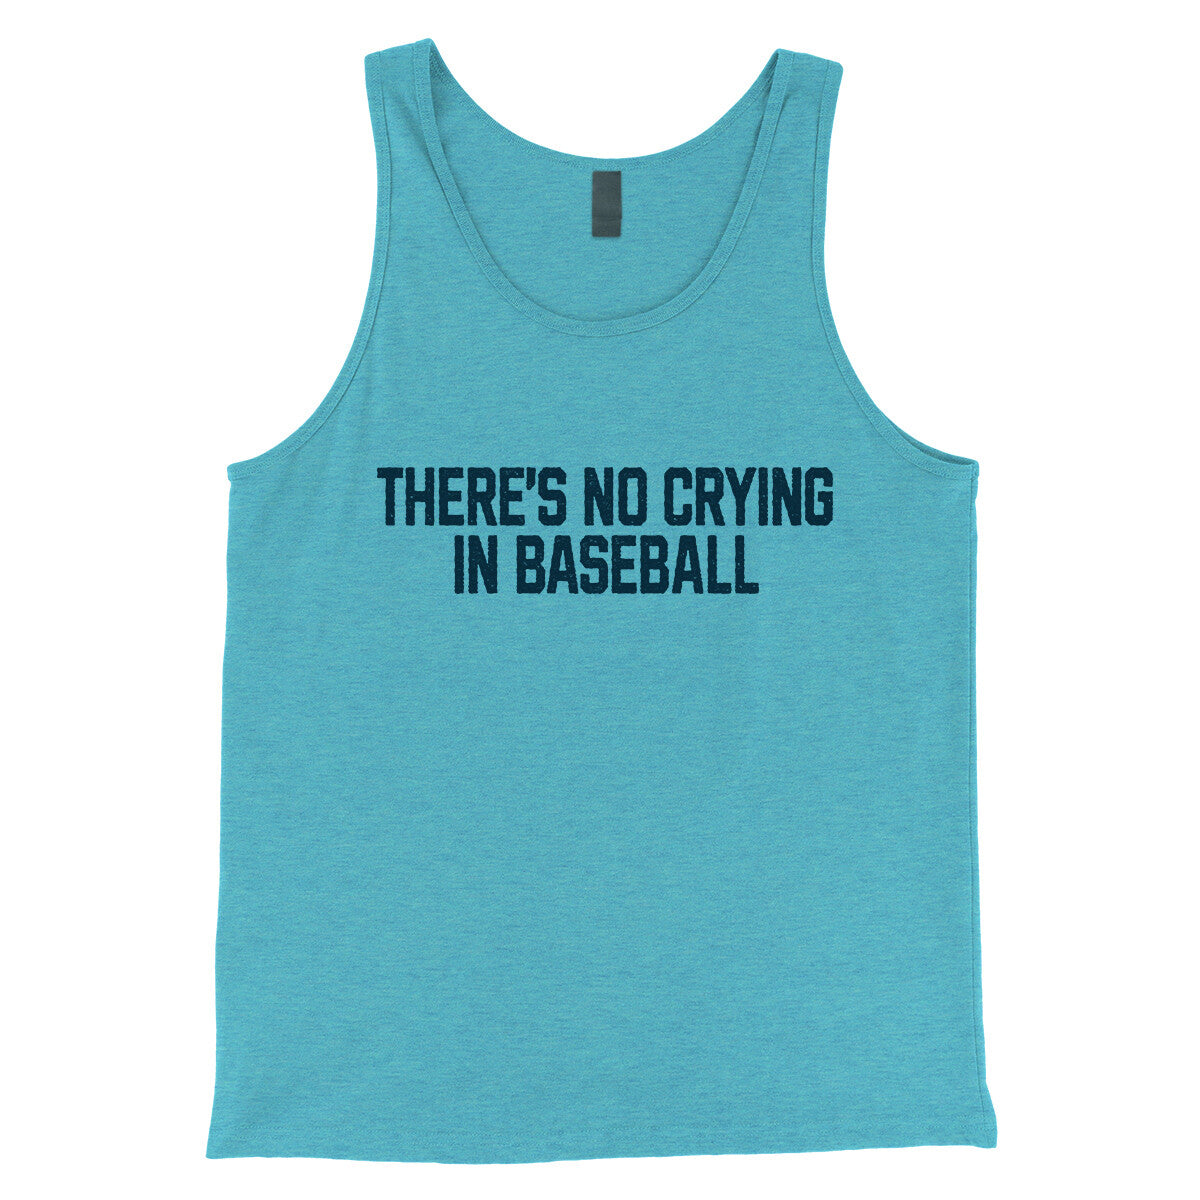 There's No Crying in Baseball in Aqua Triblend Color